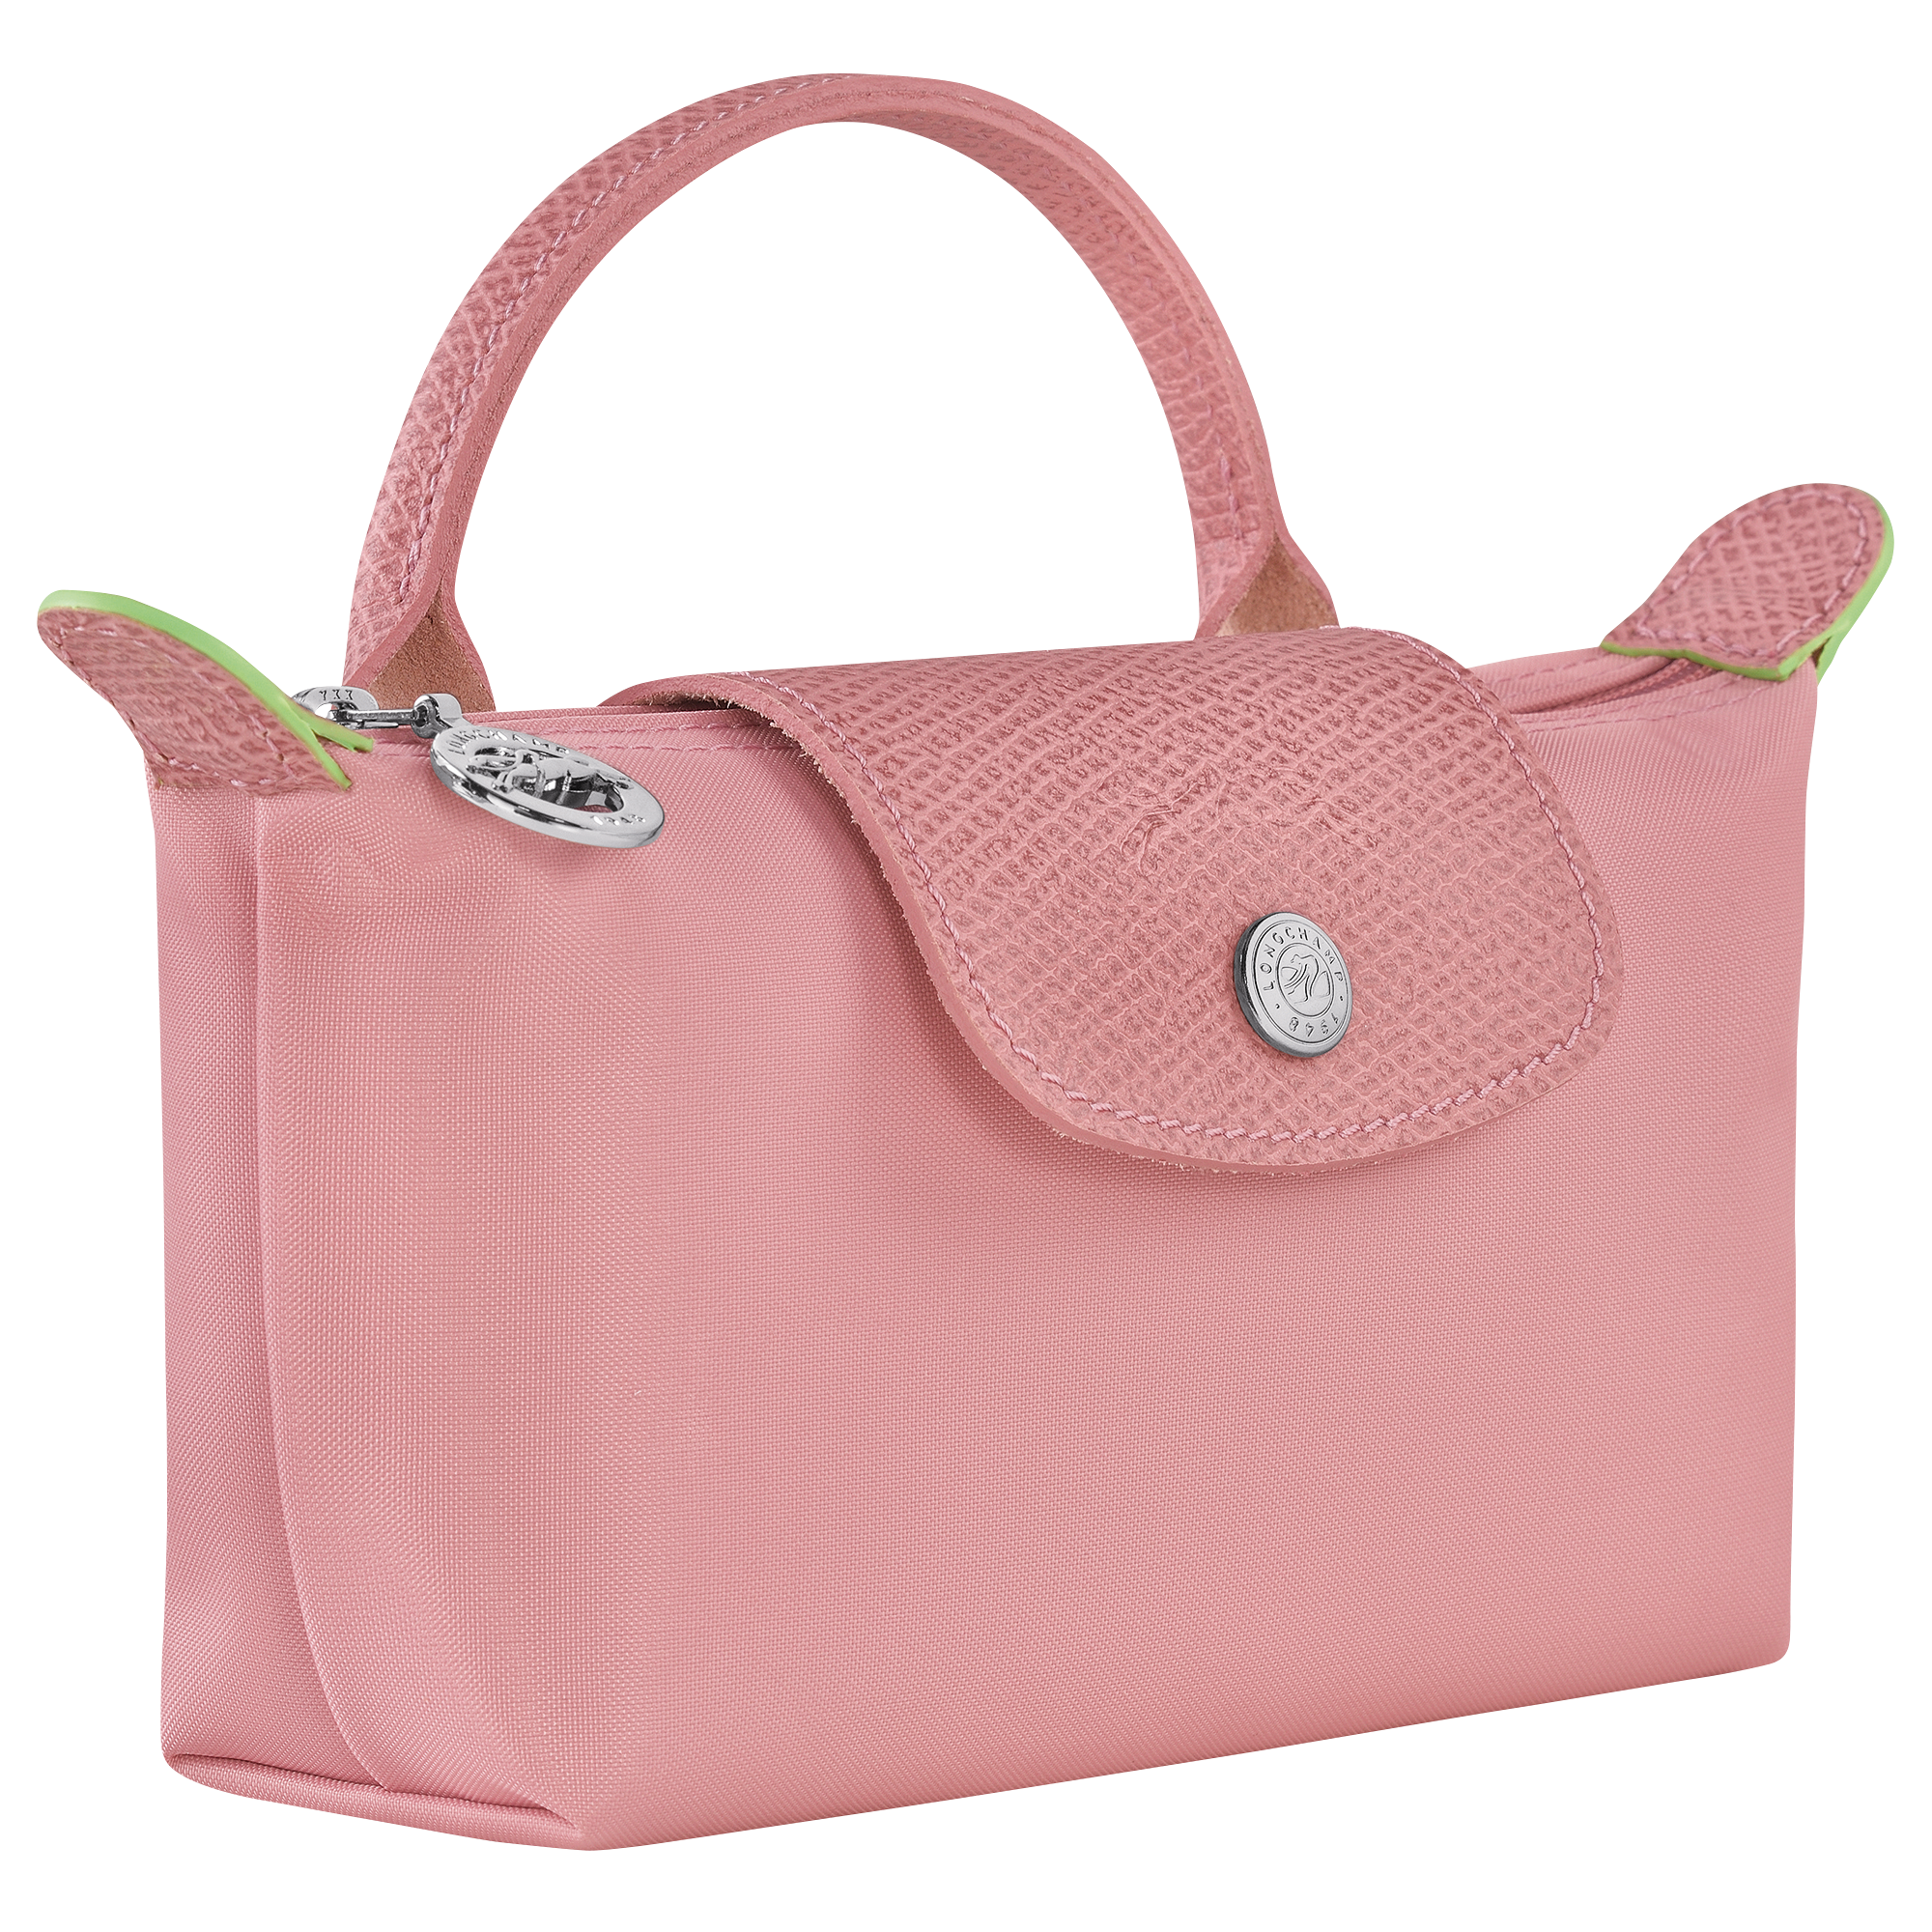 Longchamp LE PLIAGE GREEN - Pouch with handle in Petal Pink - 3 (SKU: 34175919P72)